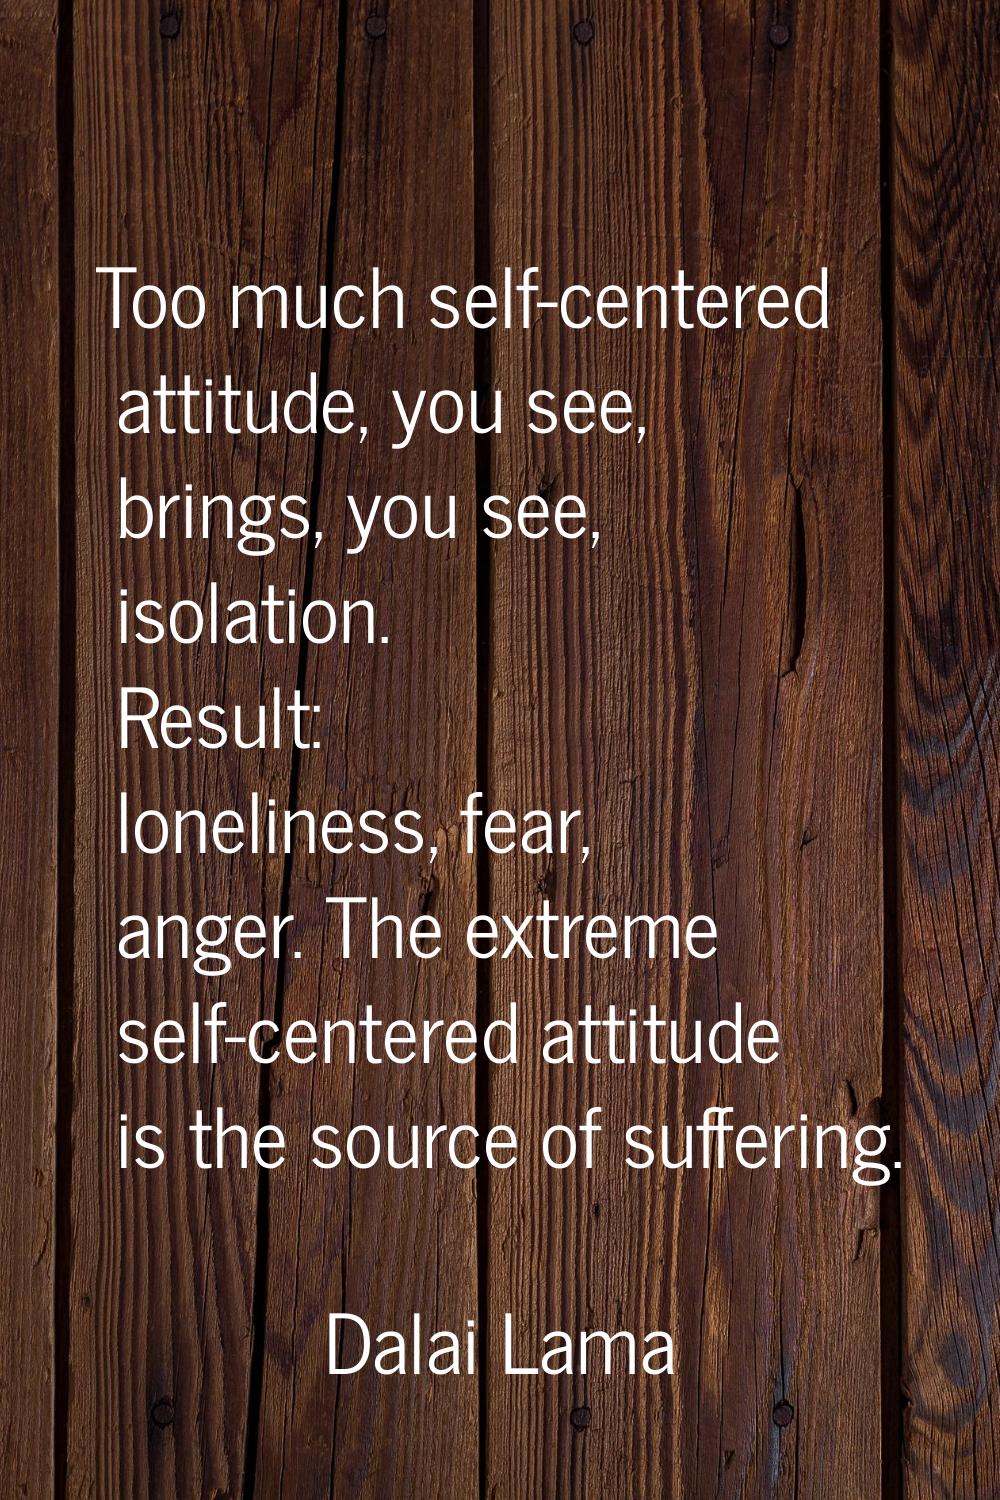 Too much self-centered attitude, you see, brings, you see, isolation. Result: loneliness, fear, ang